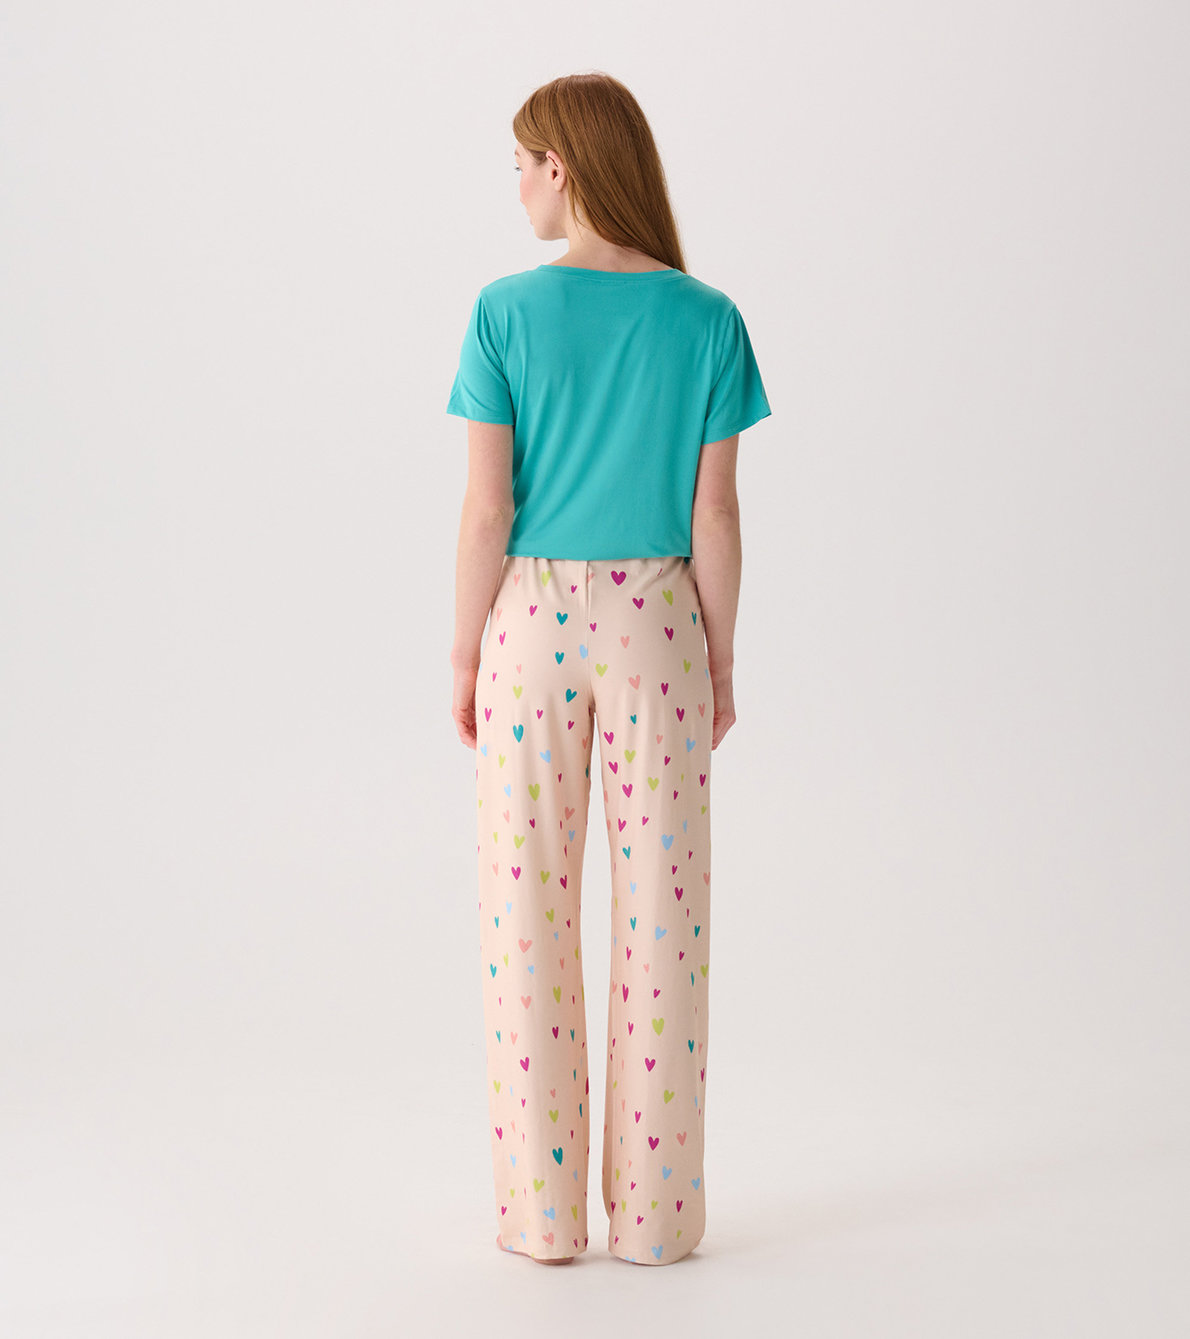 View larger image of Capelton Road Women's Jelly Bean Hearts Pajama Pants